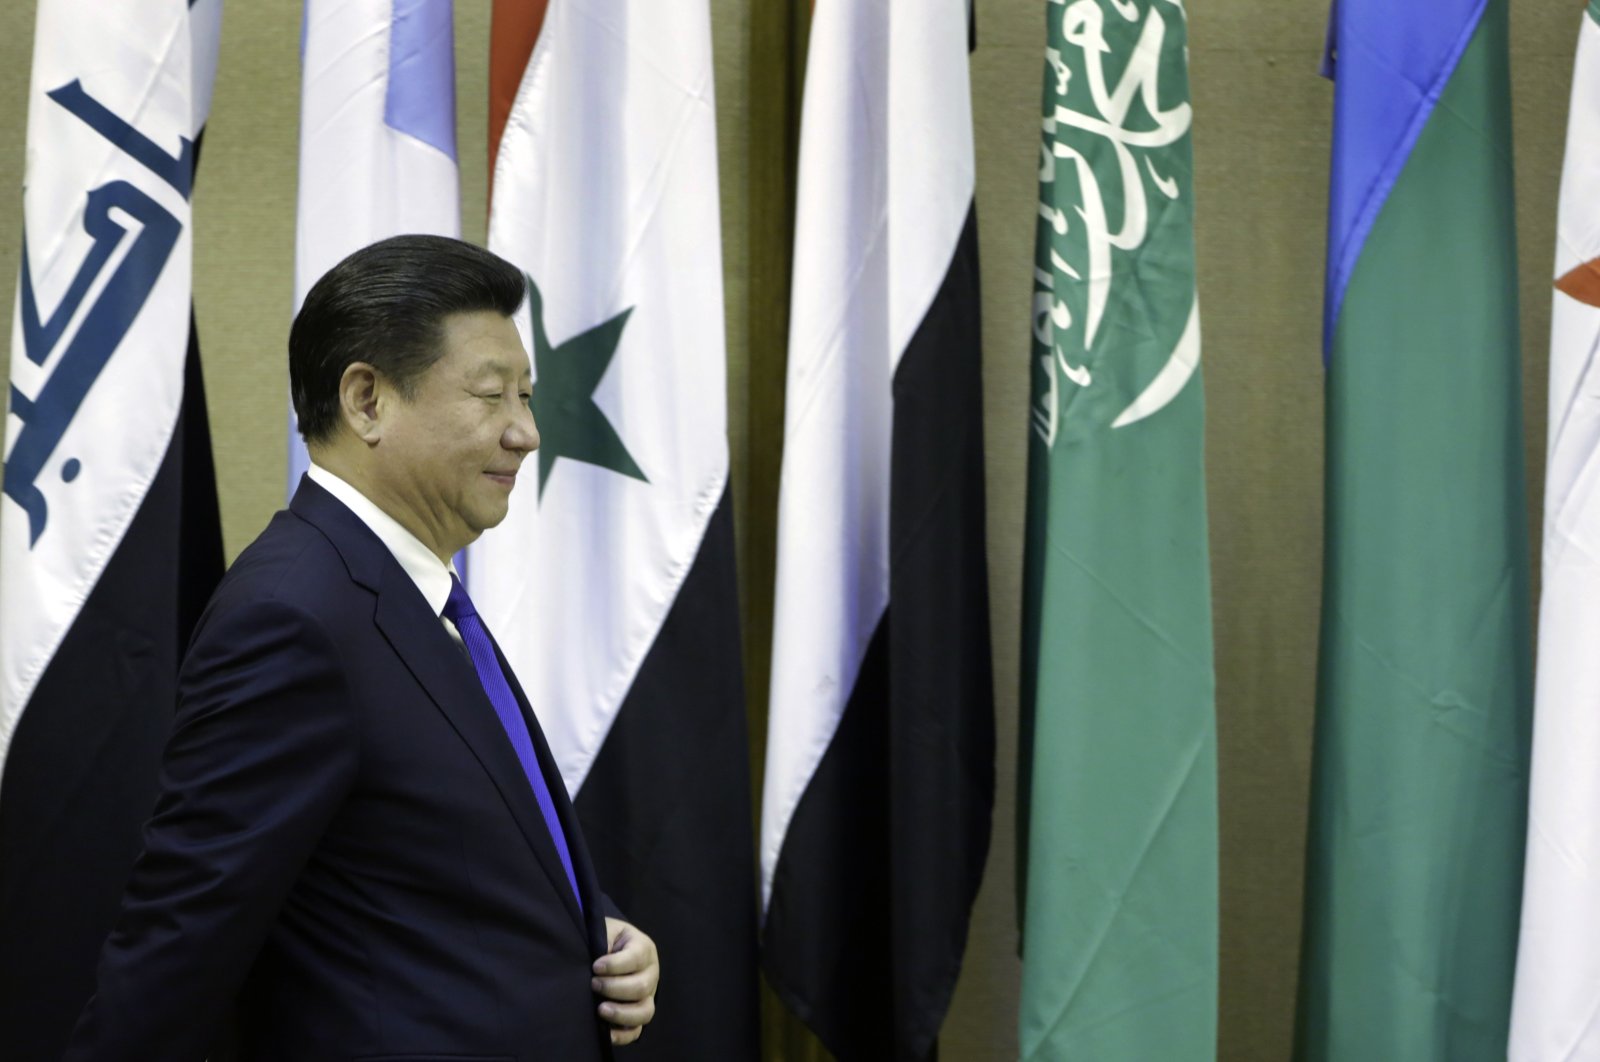 Chinese President Xi Jinping (L) walks in front of flags of Arab countries during his visit to the Arab League headquarters in Cairo, Egypt, Jan. 21, 2016. (AP Photo/Amr Nabil)